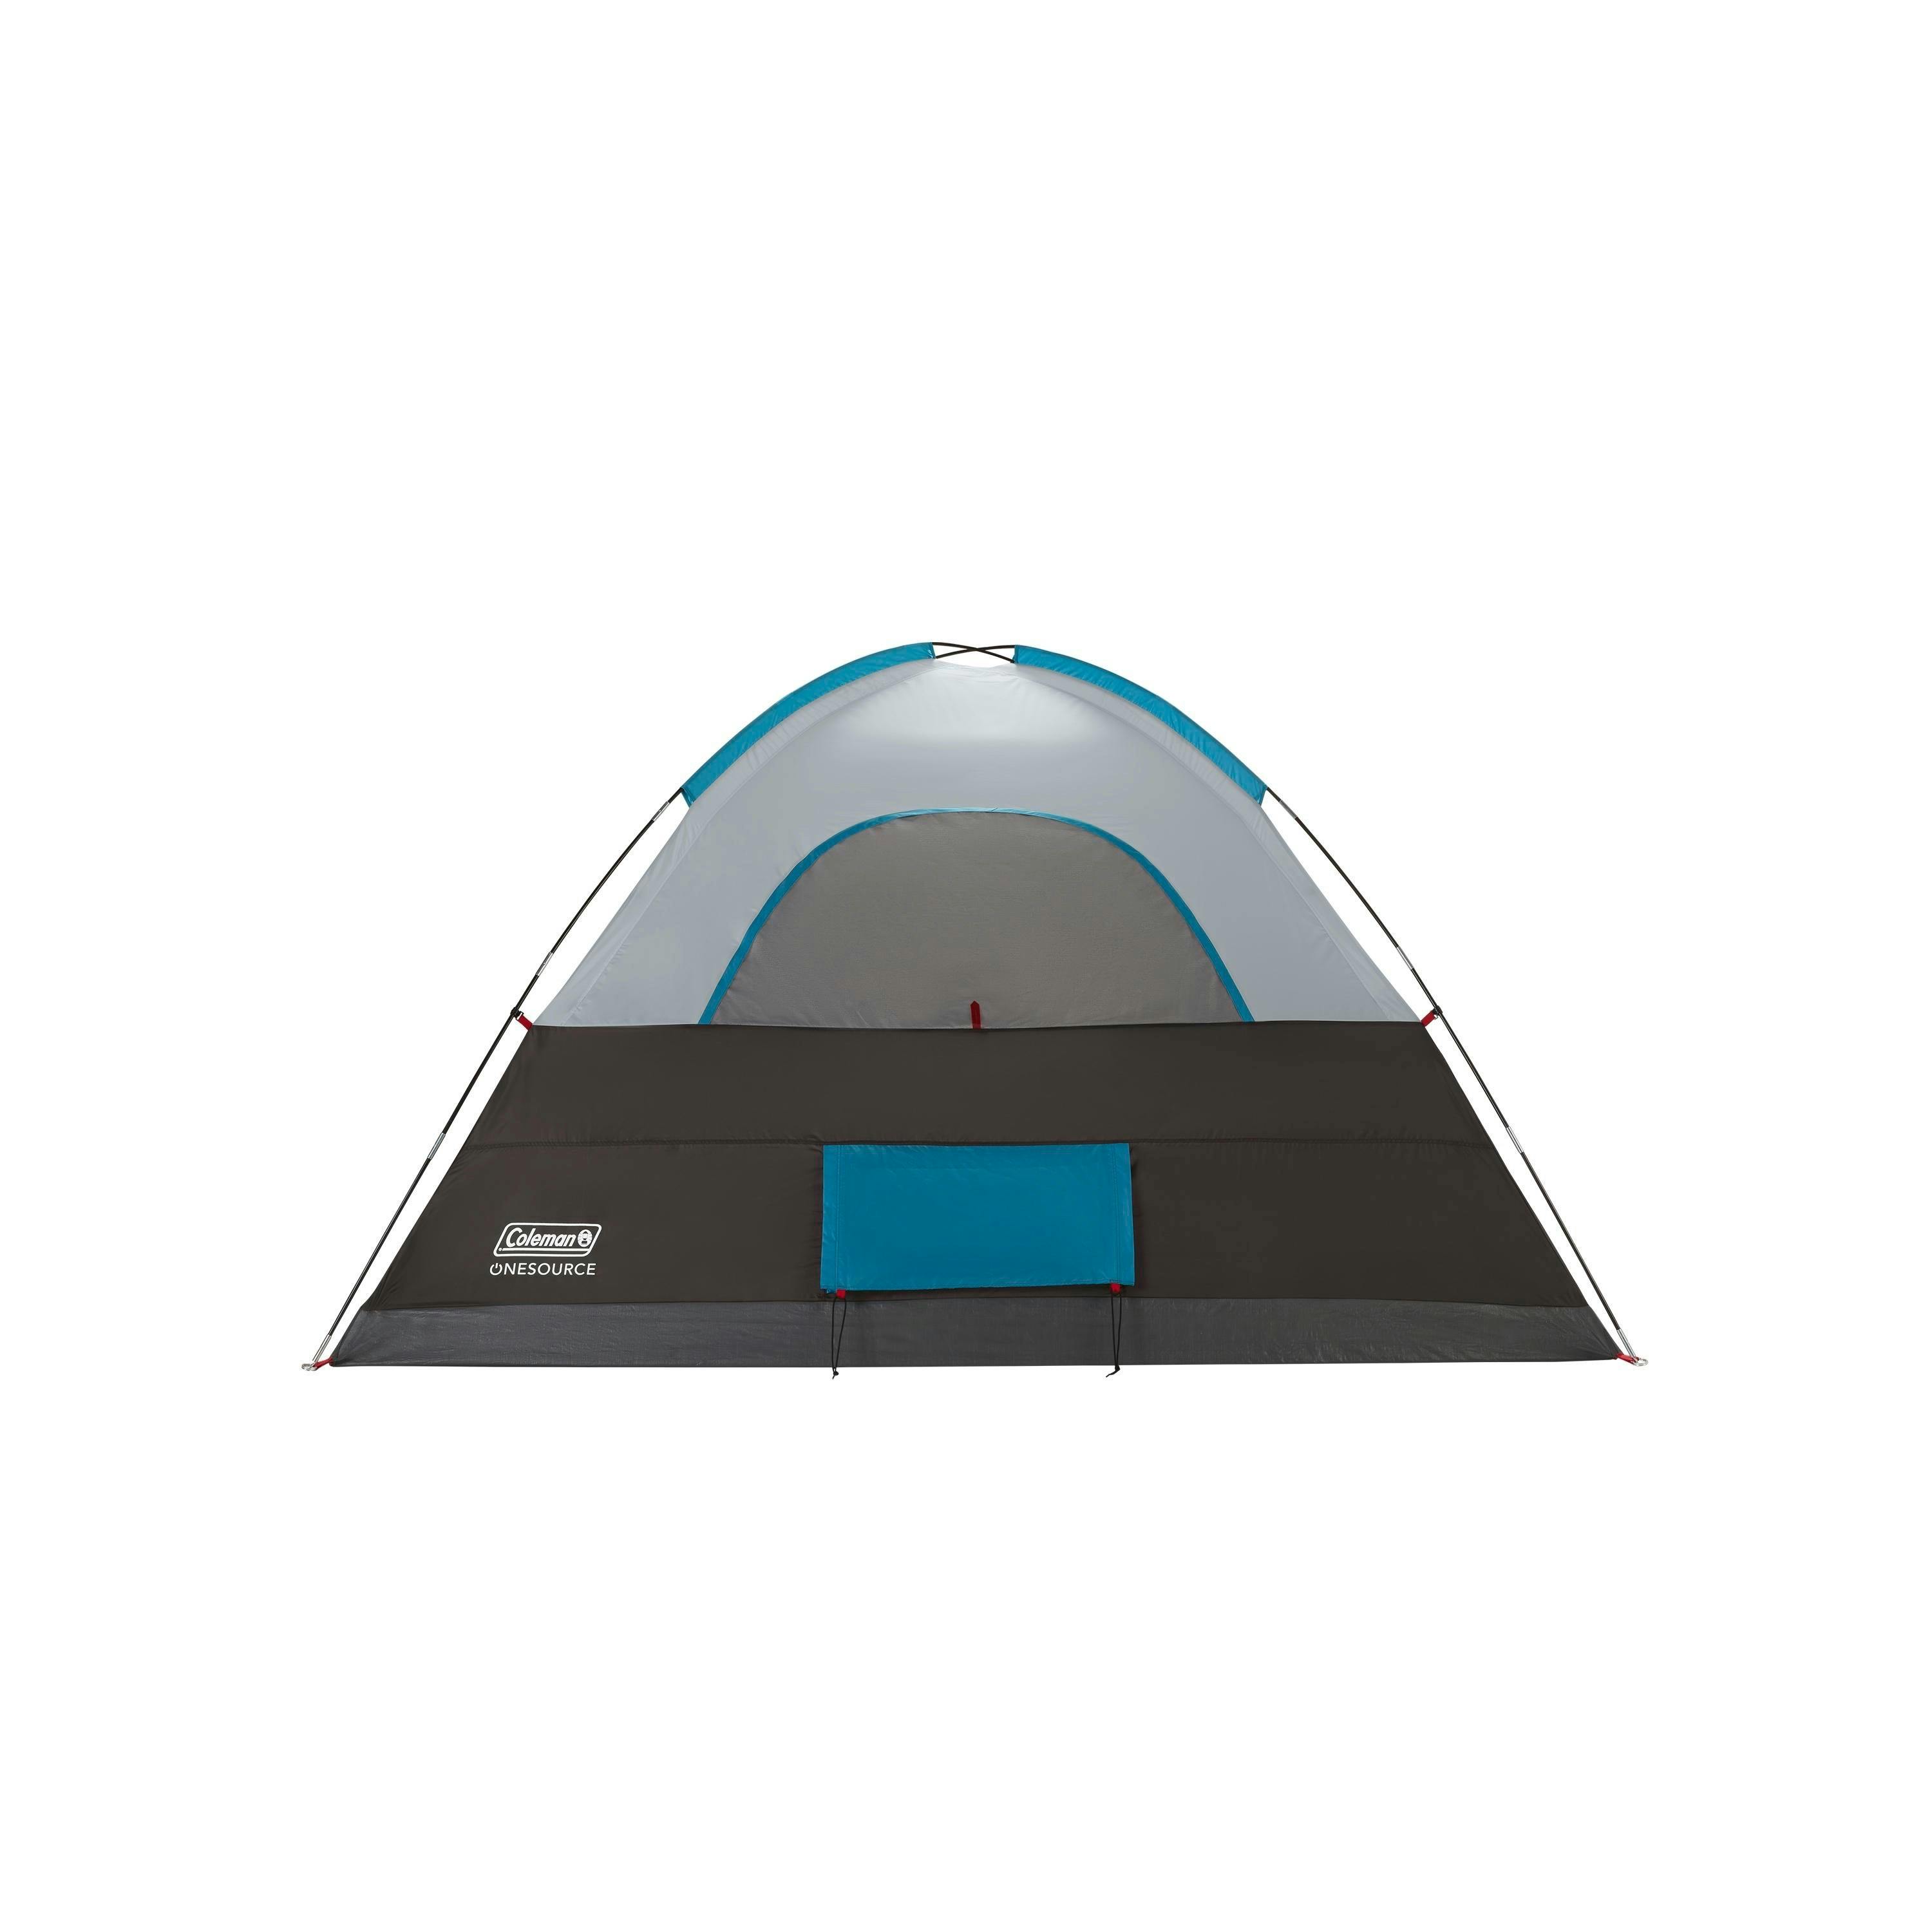 Coleman OneSource Camping Dome Tent with Airflow System & LED Lighting